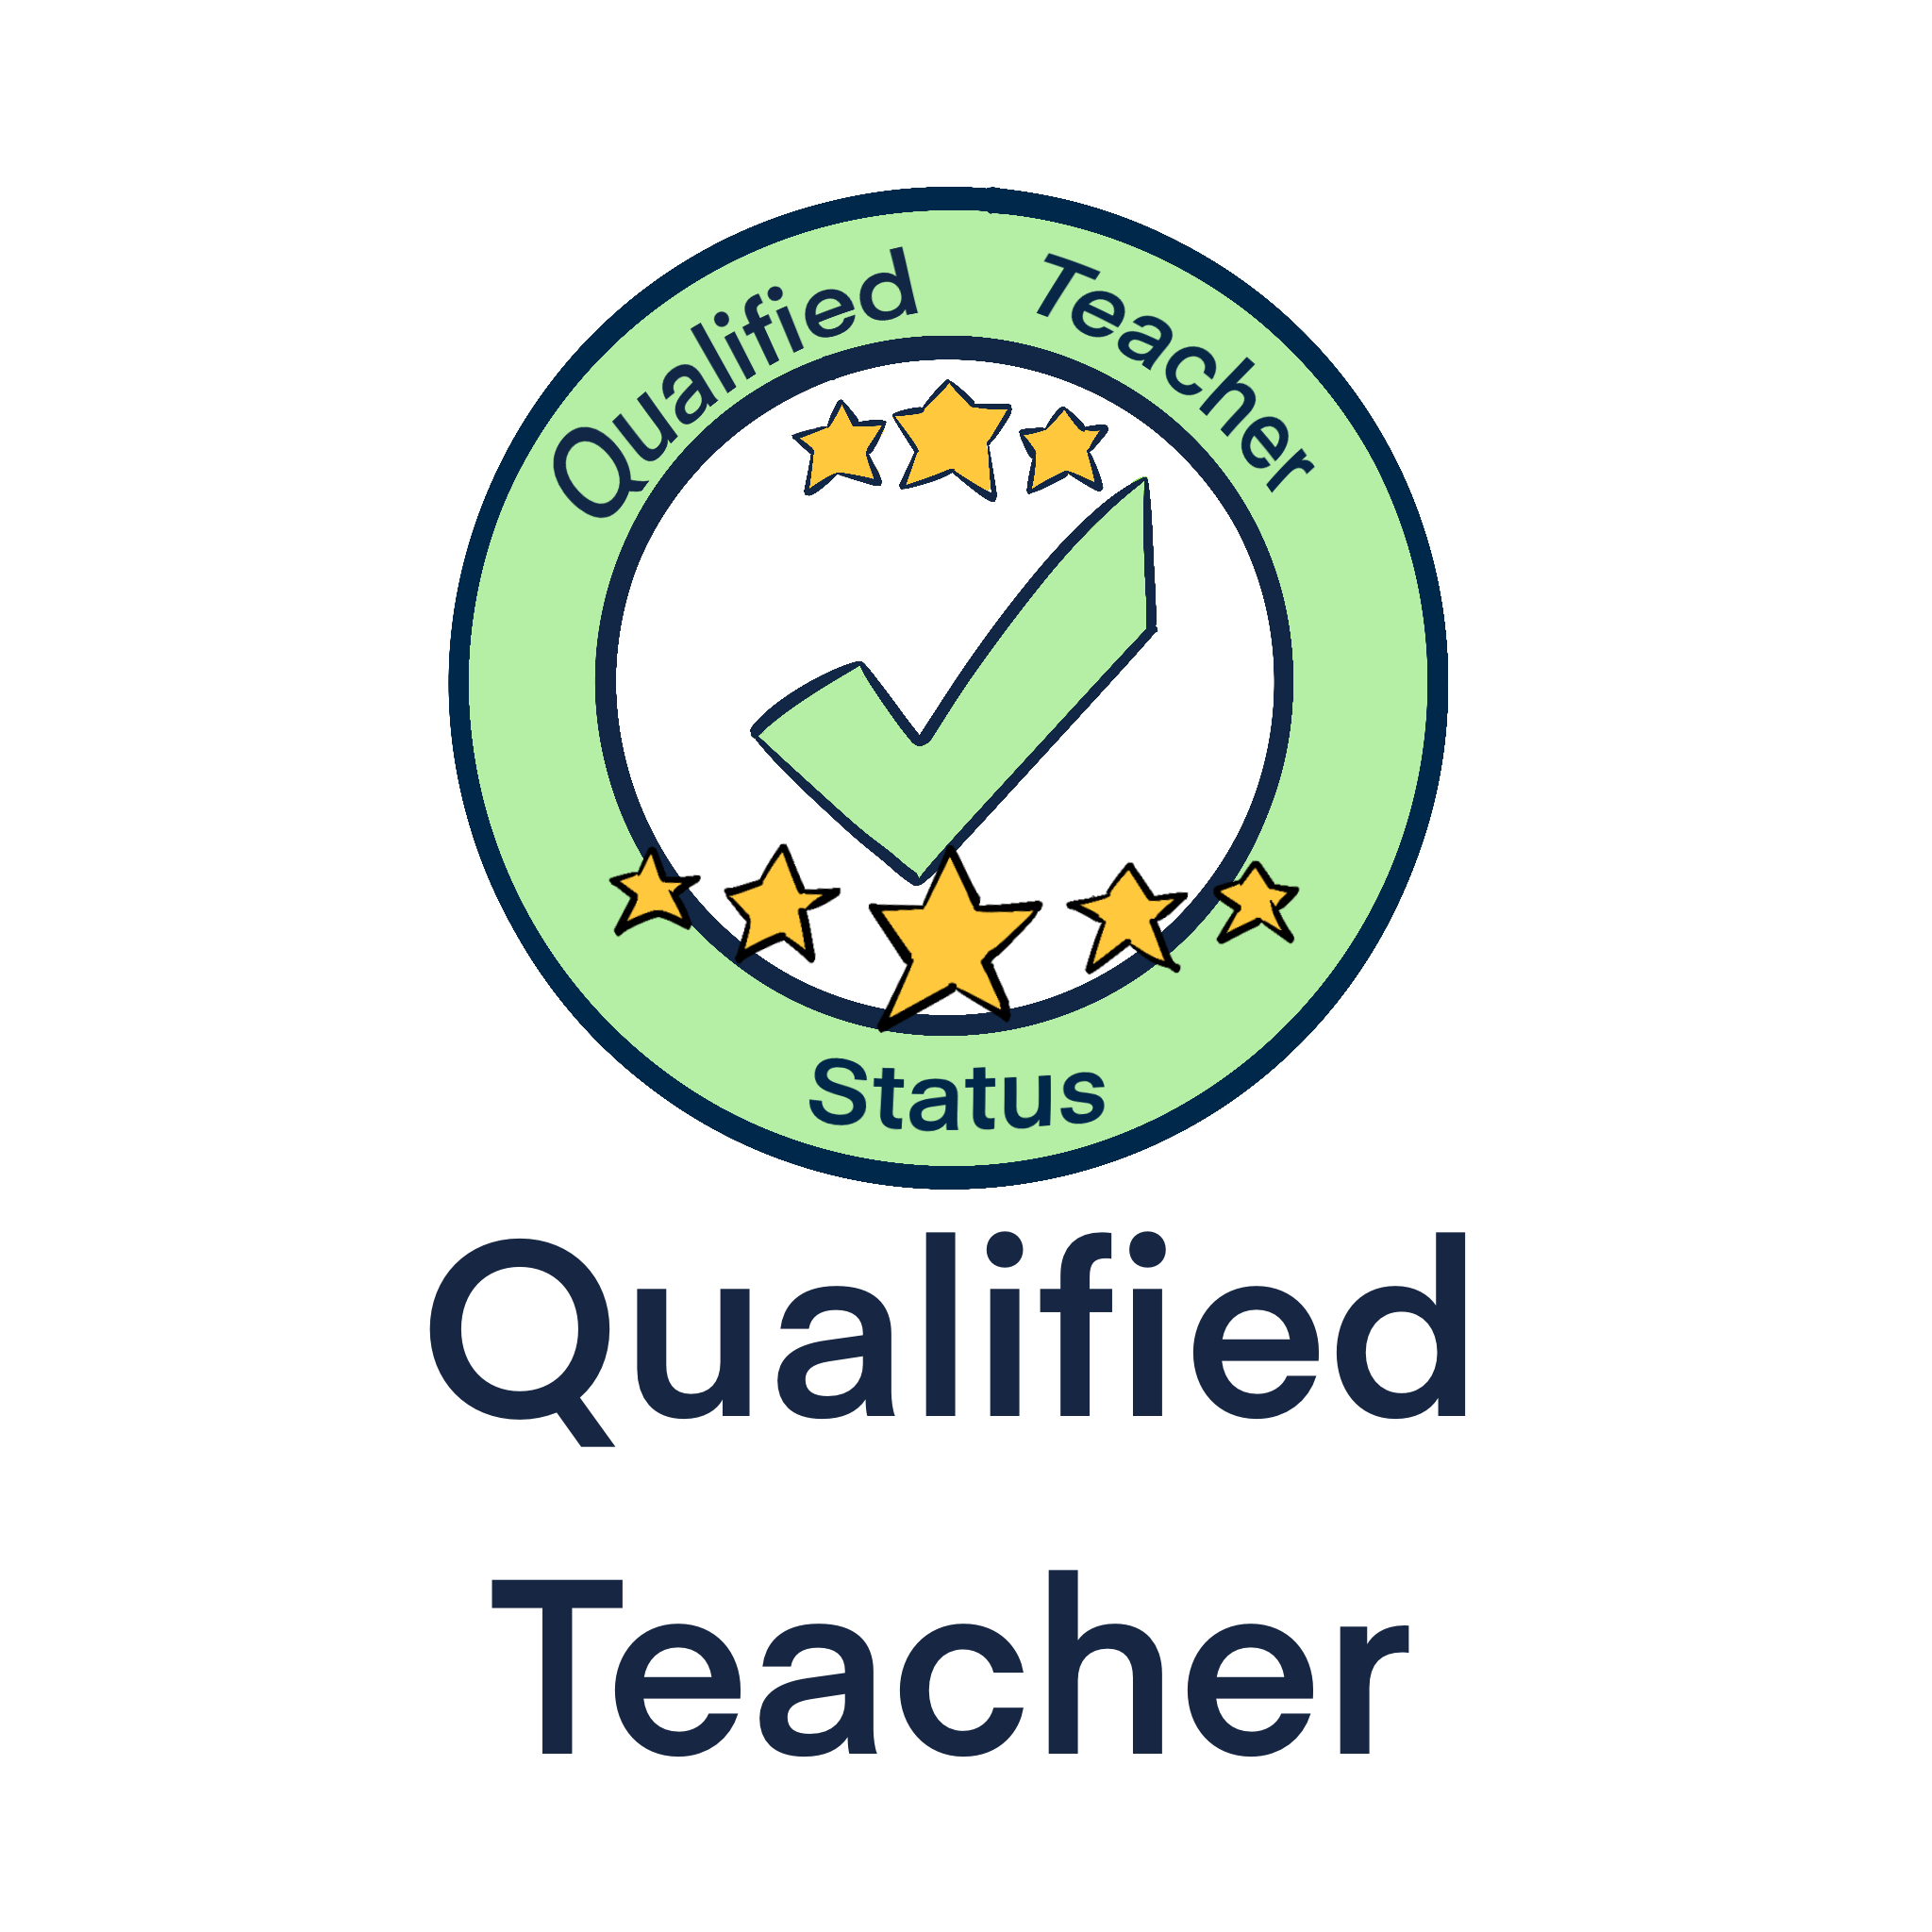 Like all our tutors, Andrew is a qualified teacher